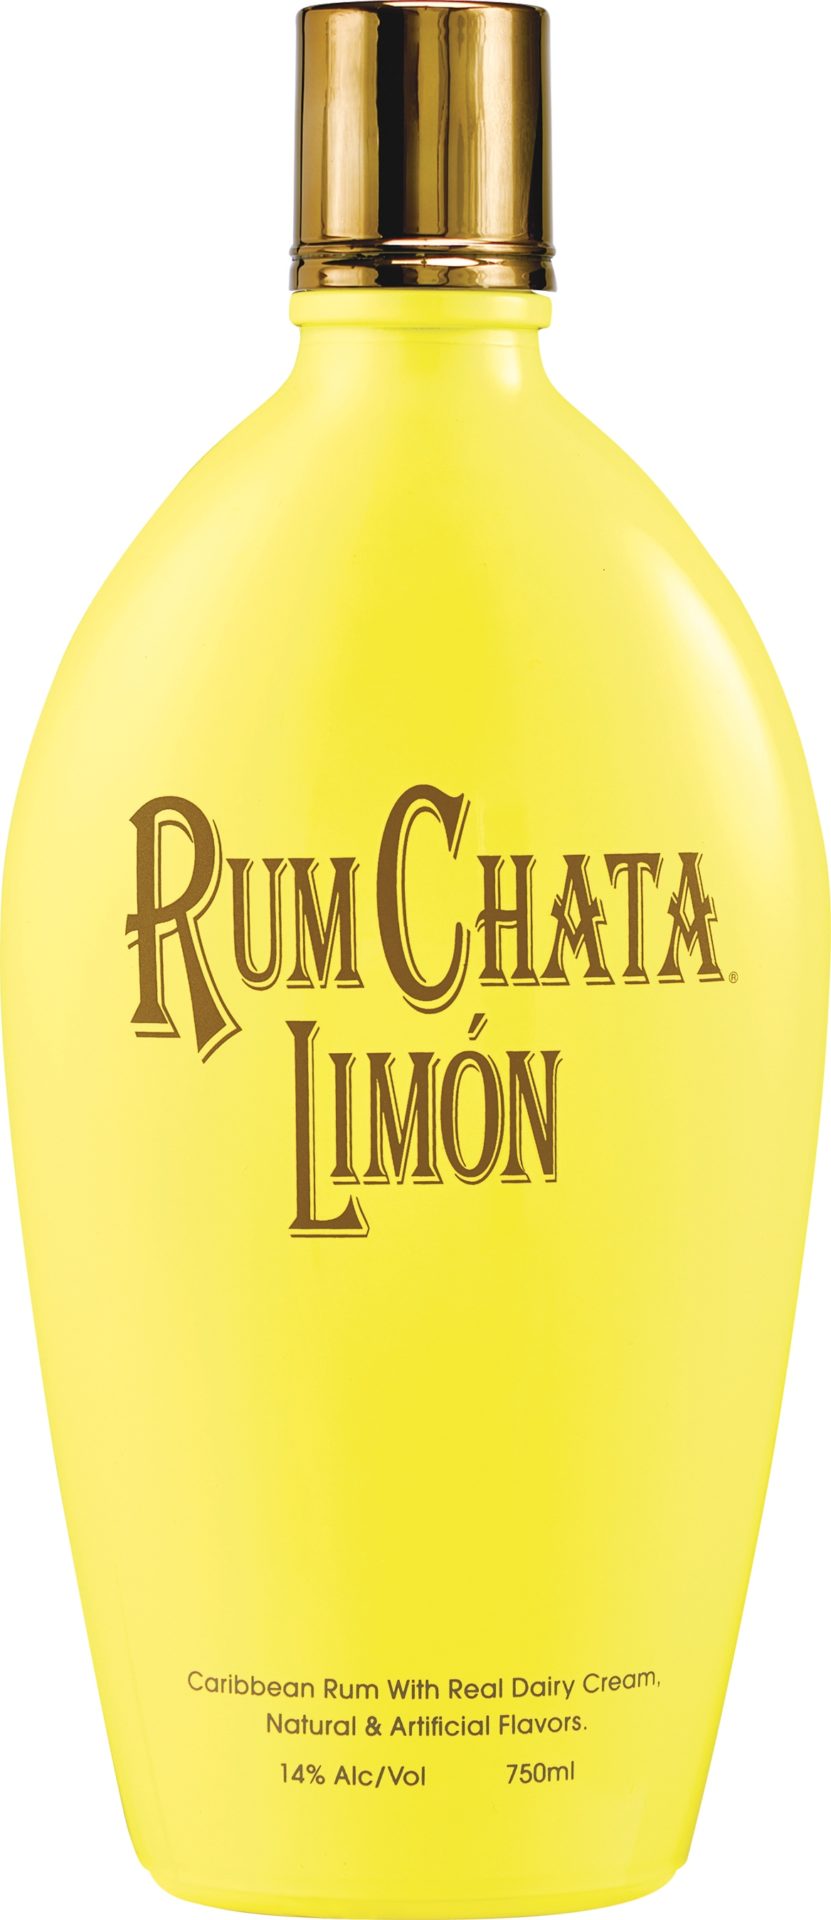 Introducing RumChata Limón - Just In Time For Summer - Spirited Magazine